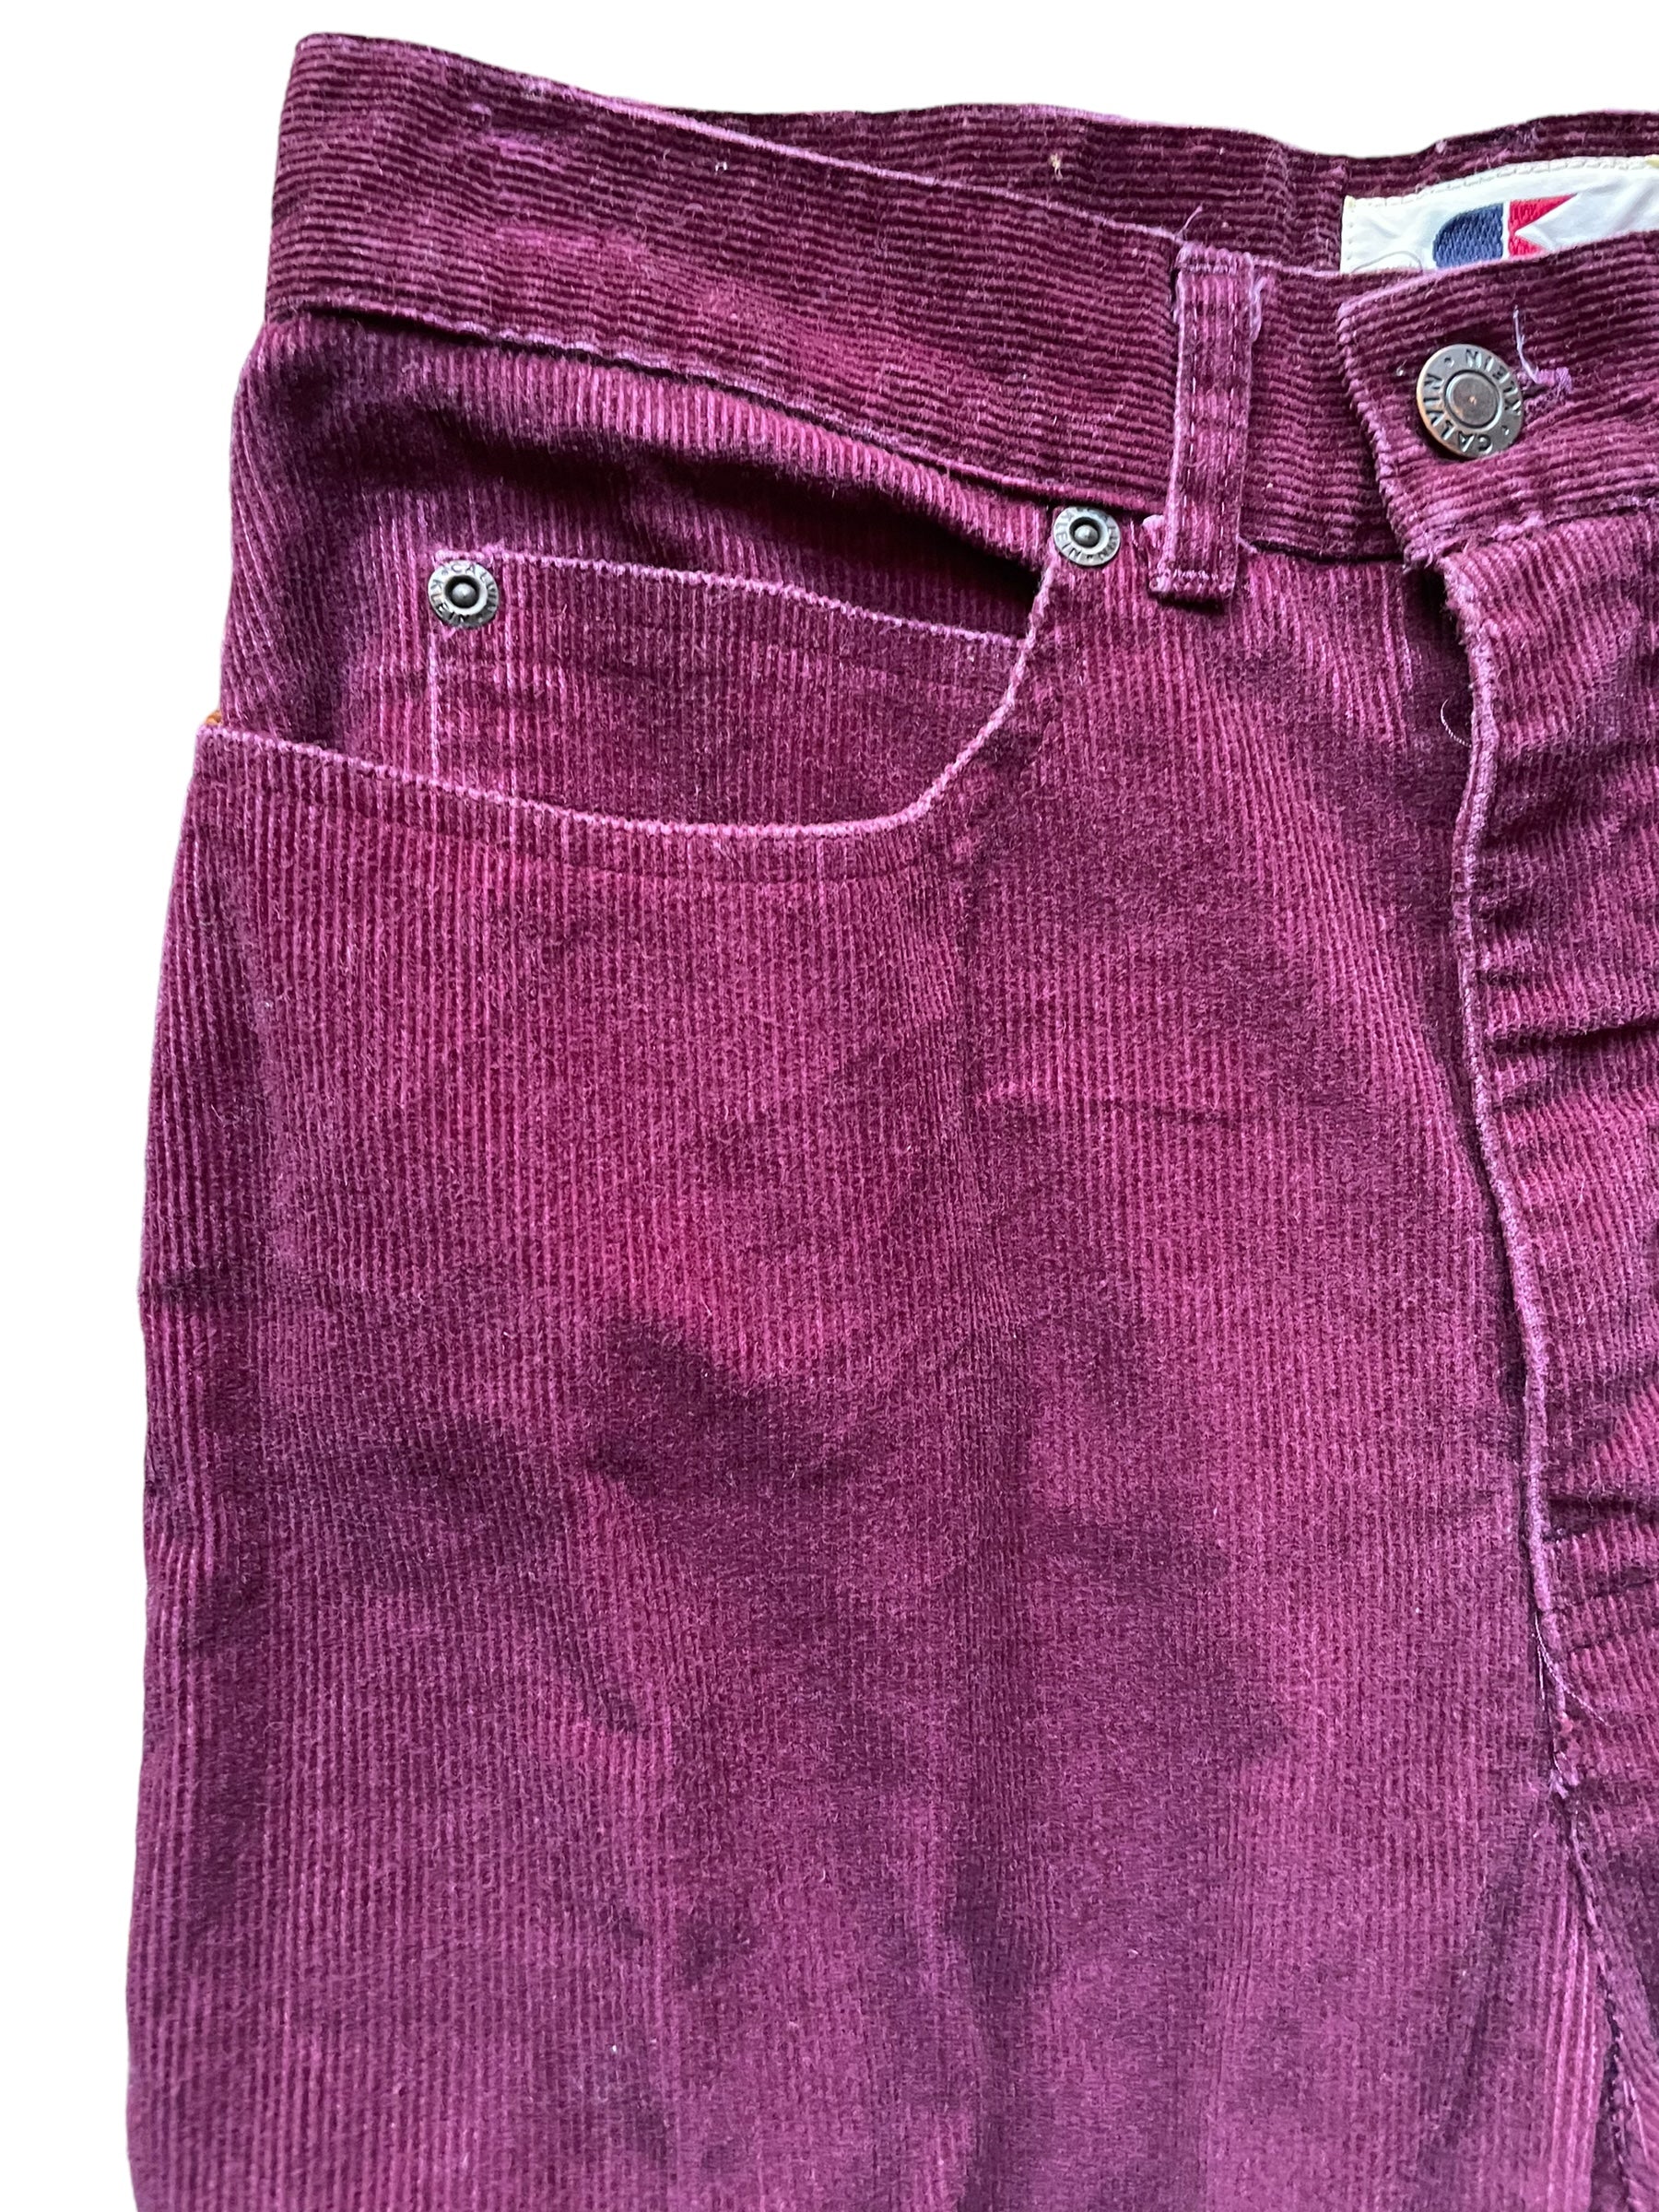 Front right side waist view of Vintage 1970s Calvin Klein Corduroy Pants W26 | Barn Owl Vintage Seattle | Vintage Corduroy Pants